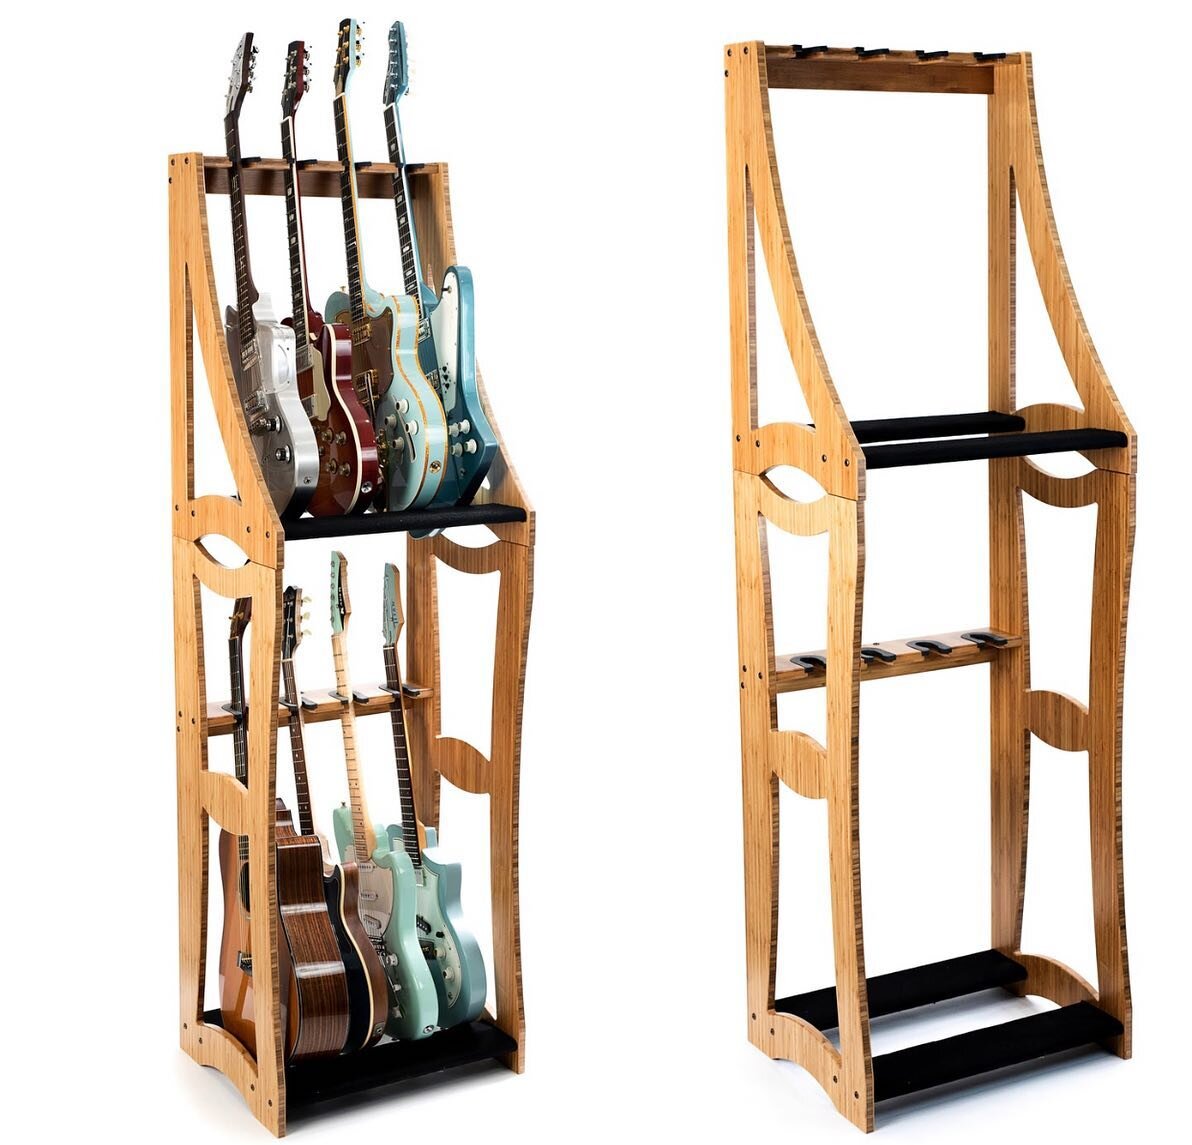 The Alpha4 and AB8 are just the hidden gems in our line up. 4 or 8 guitars stored safely in 23&rdquo; of floor space. Truly one of the best parts of our #drsracks system #thekaueroflove #kauer #kauerguitars #guitarsofinstagram #geartalk #guitar #gear